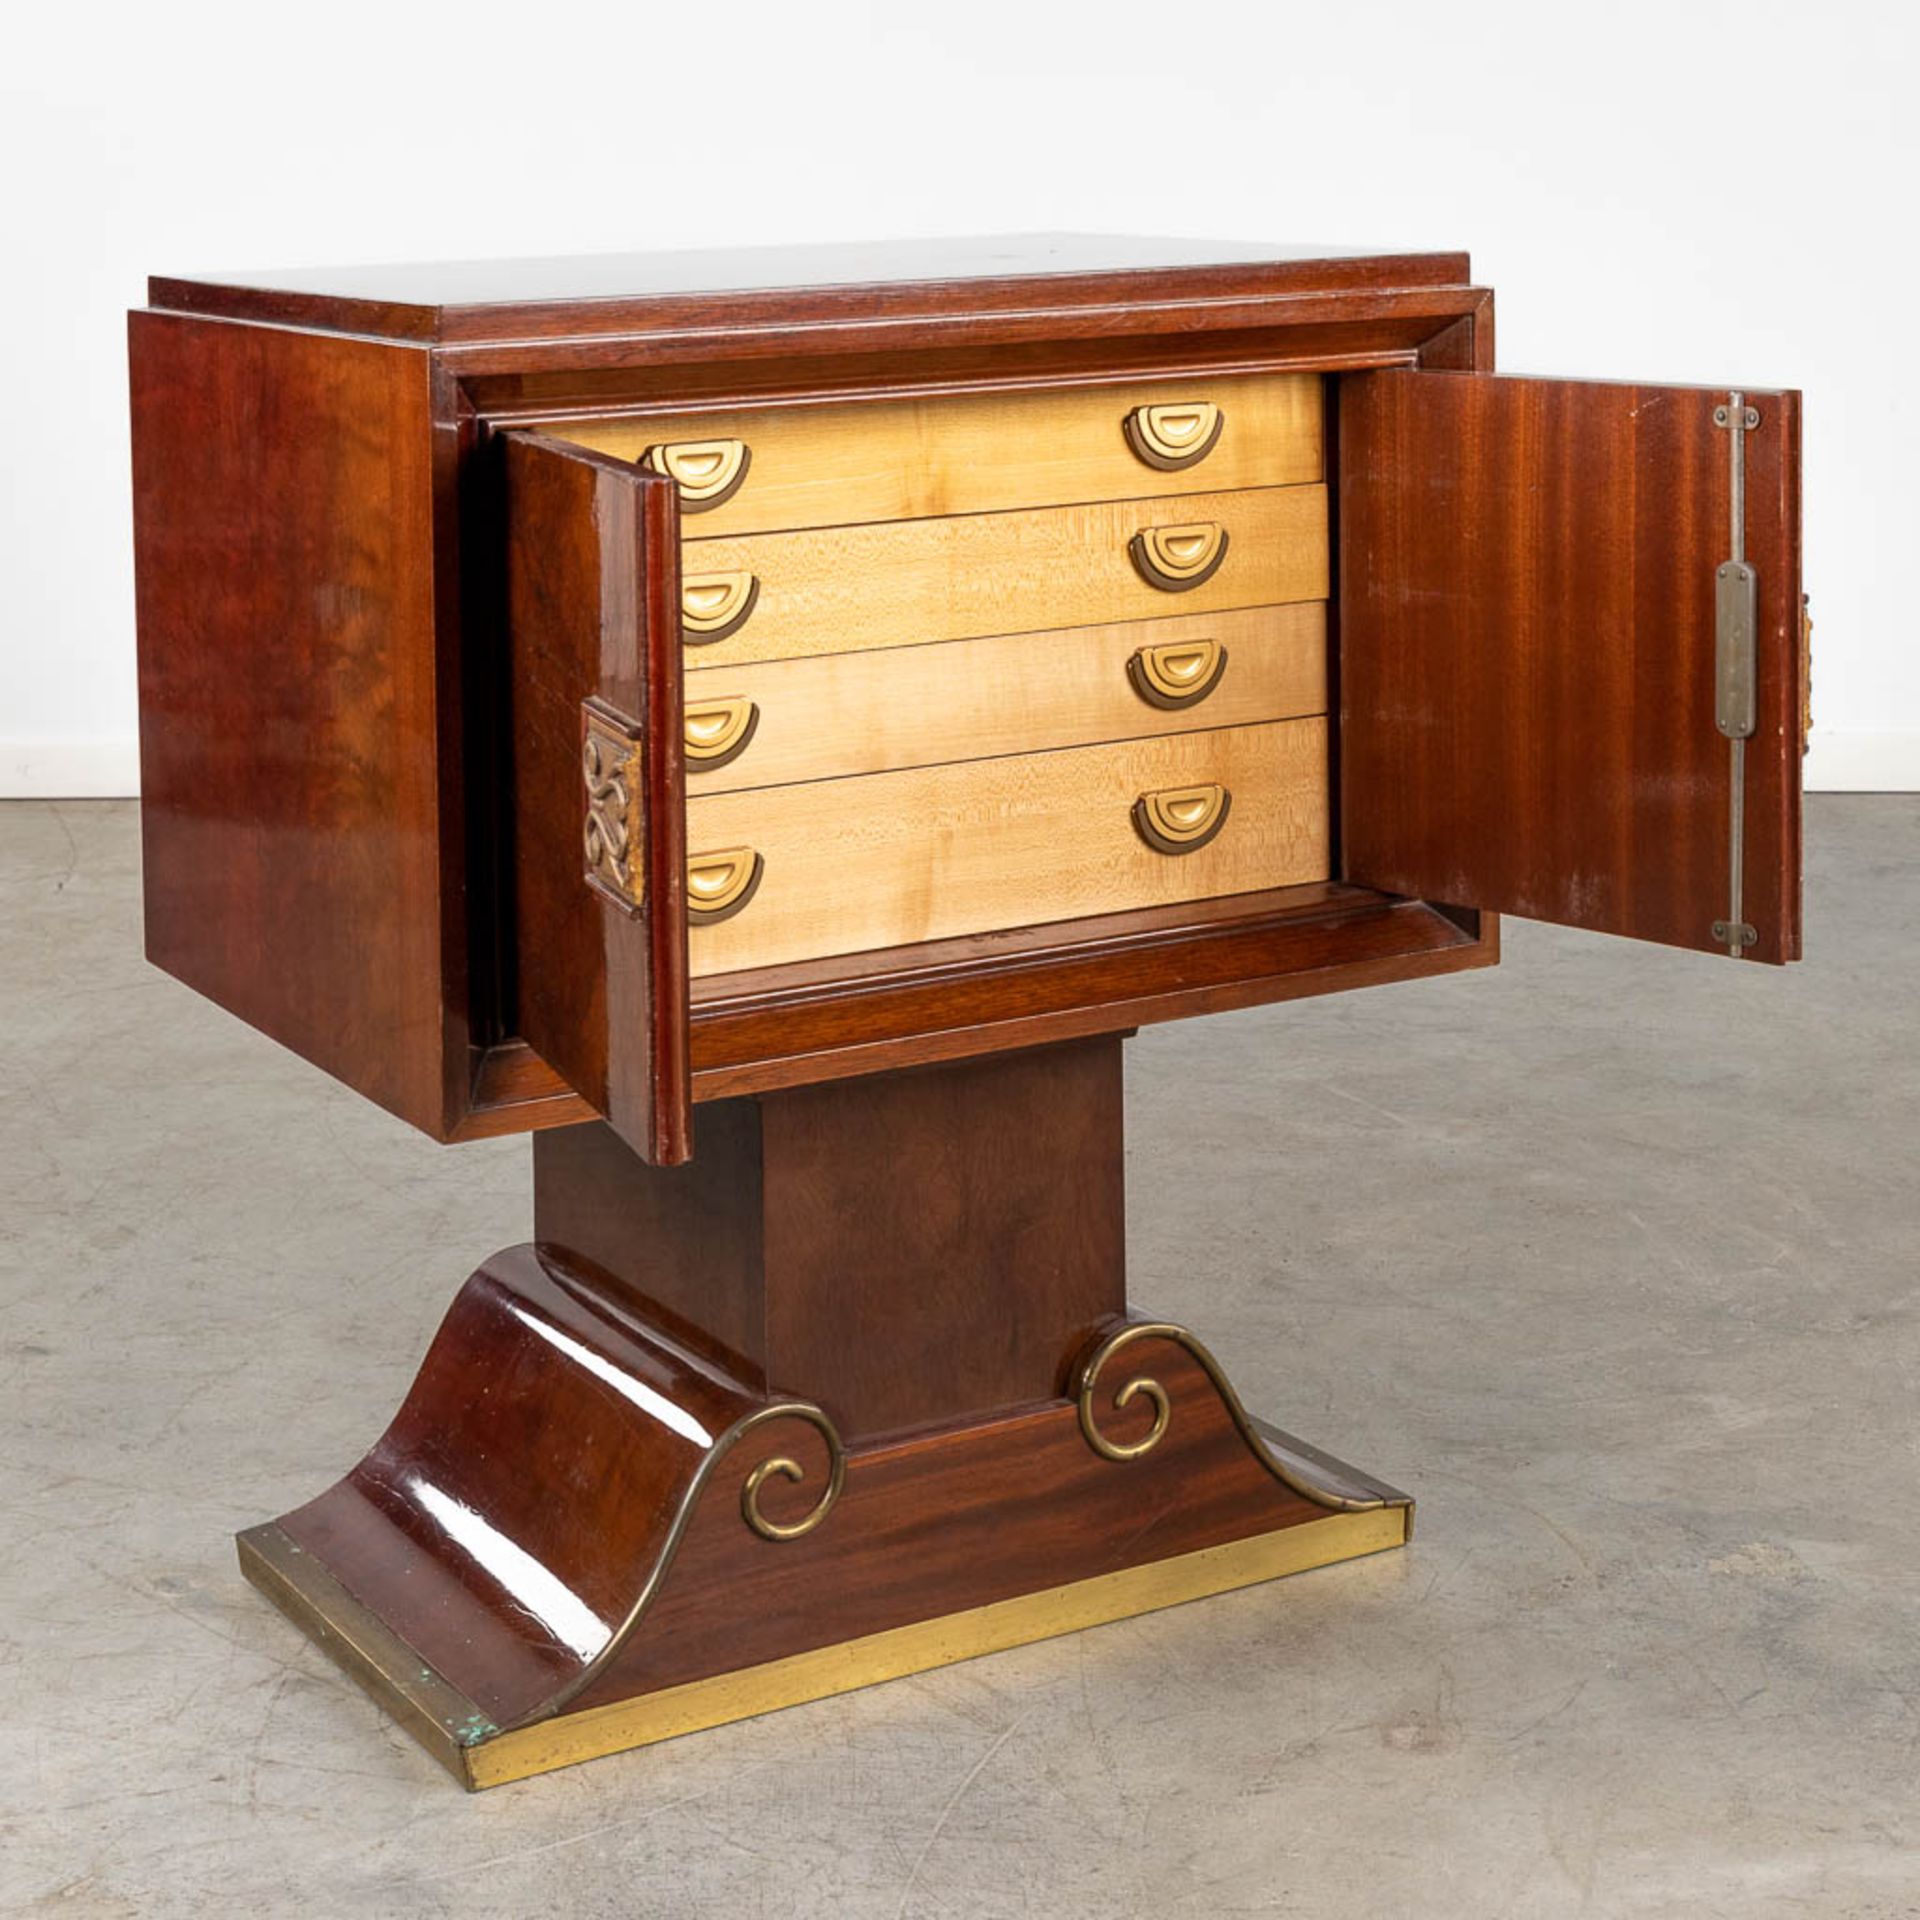 A cutlery case, veneered wood with 4 drawers, Probably made by Decoene. Circa 1950. (D:44 x W:64 x H - Image 3 of 15